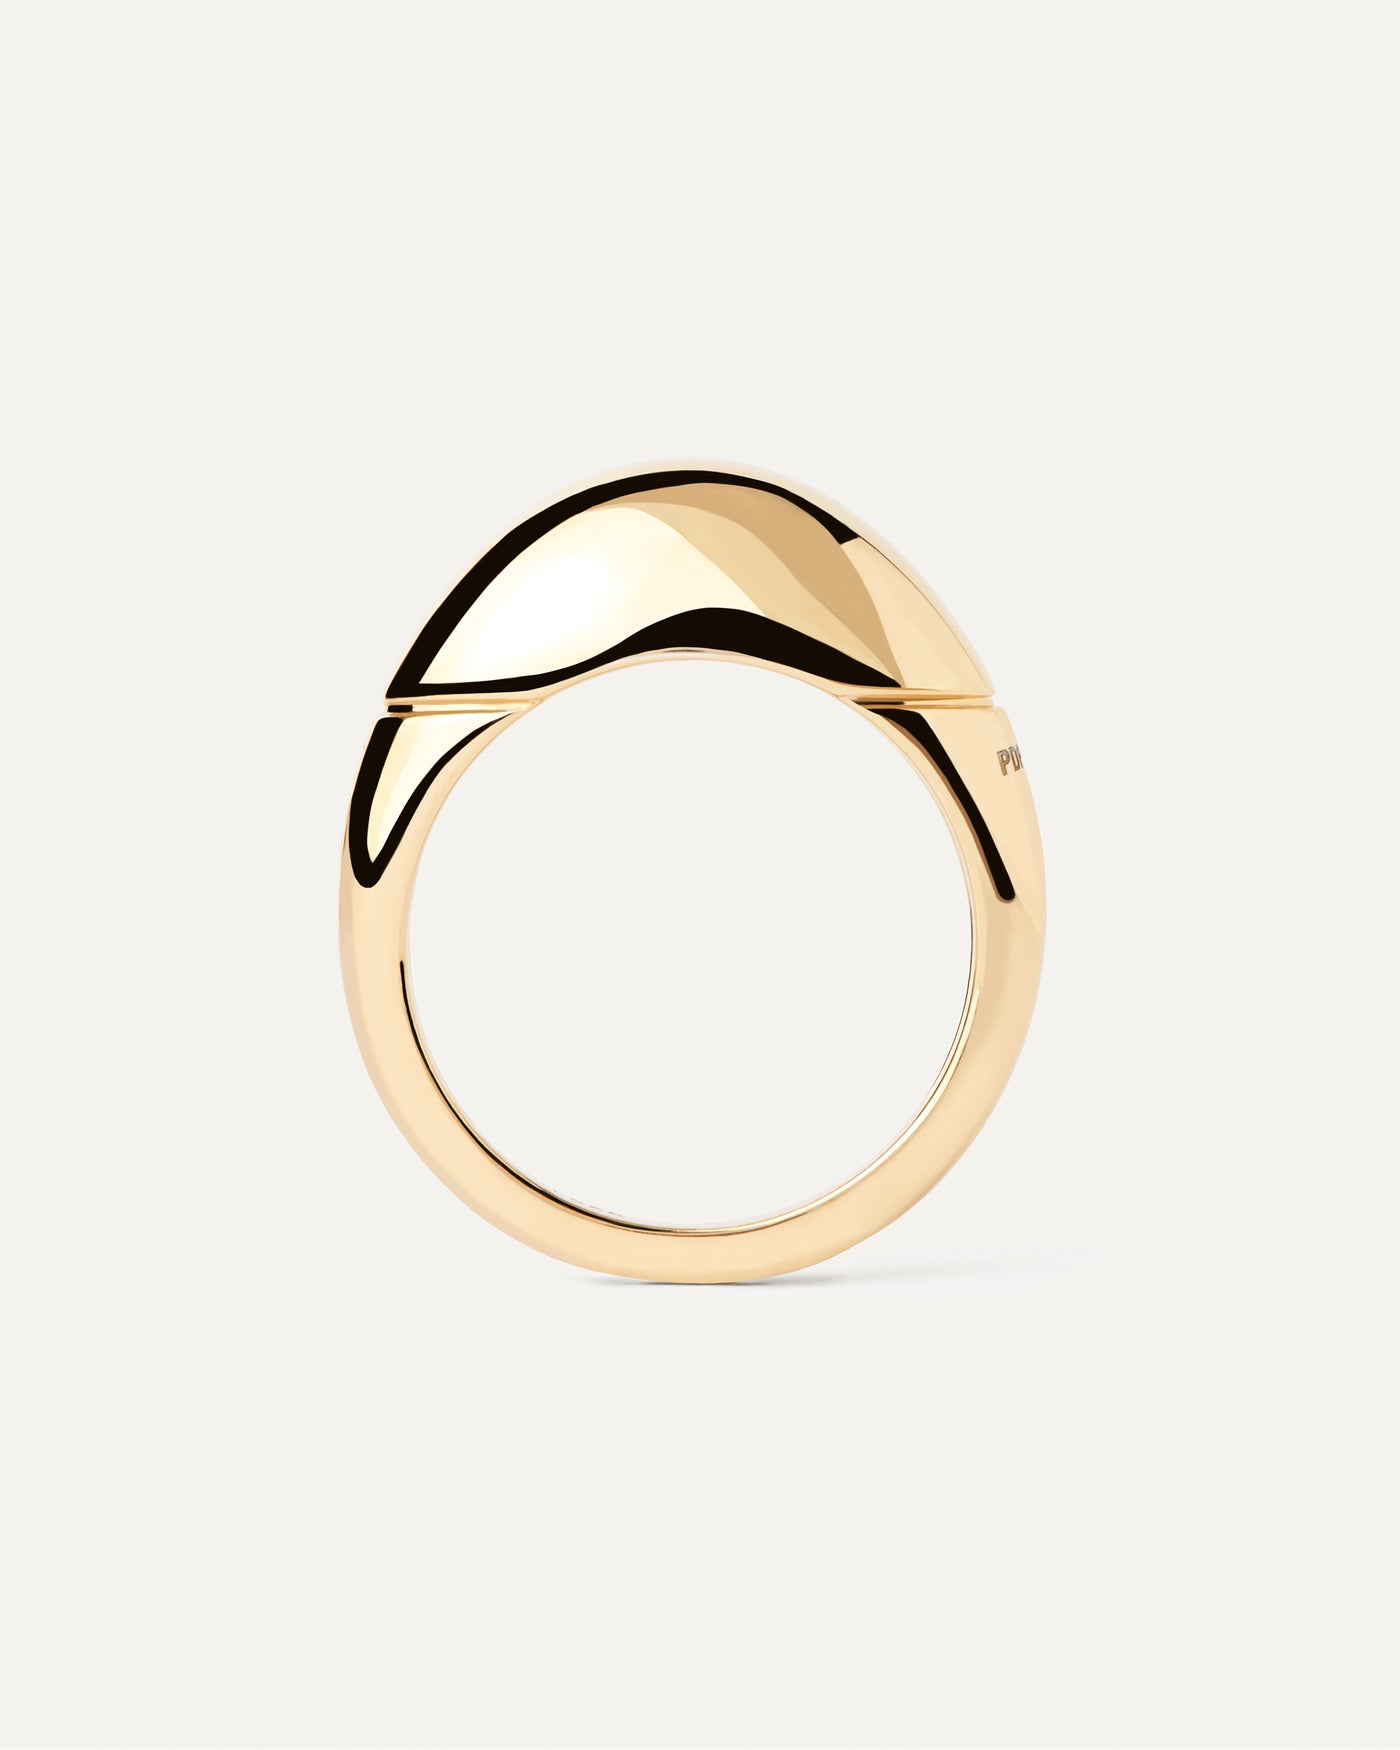 2023 Selection | Bamboo Ring. Get the latest arrival from PDPAOLA. Place your order safely and get this Best Seller. Free Shipping.